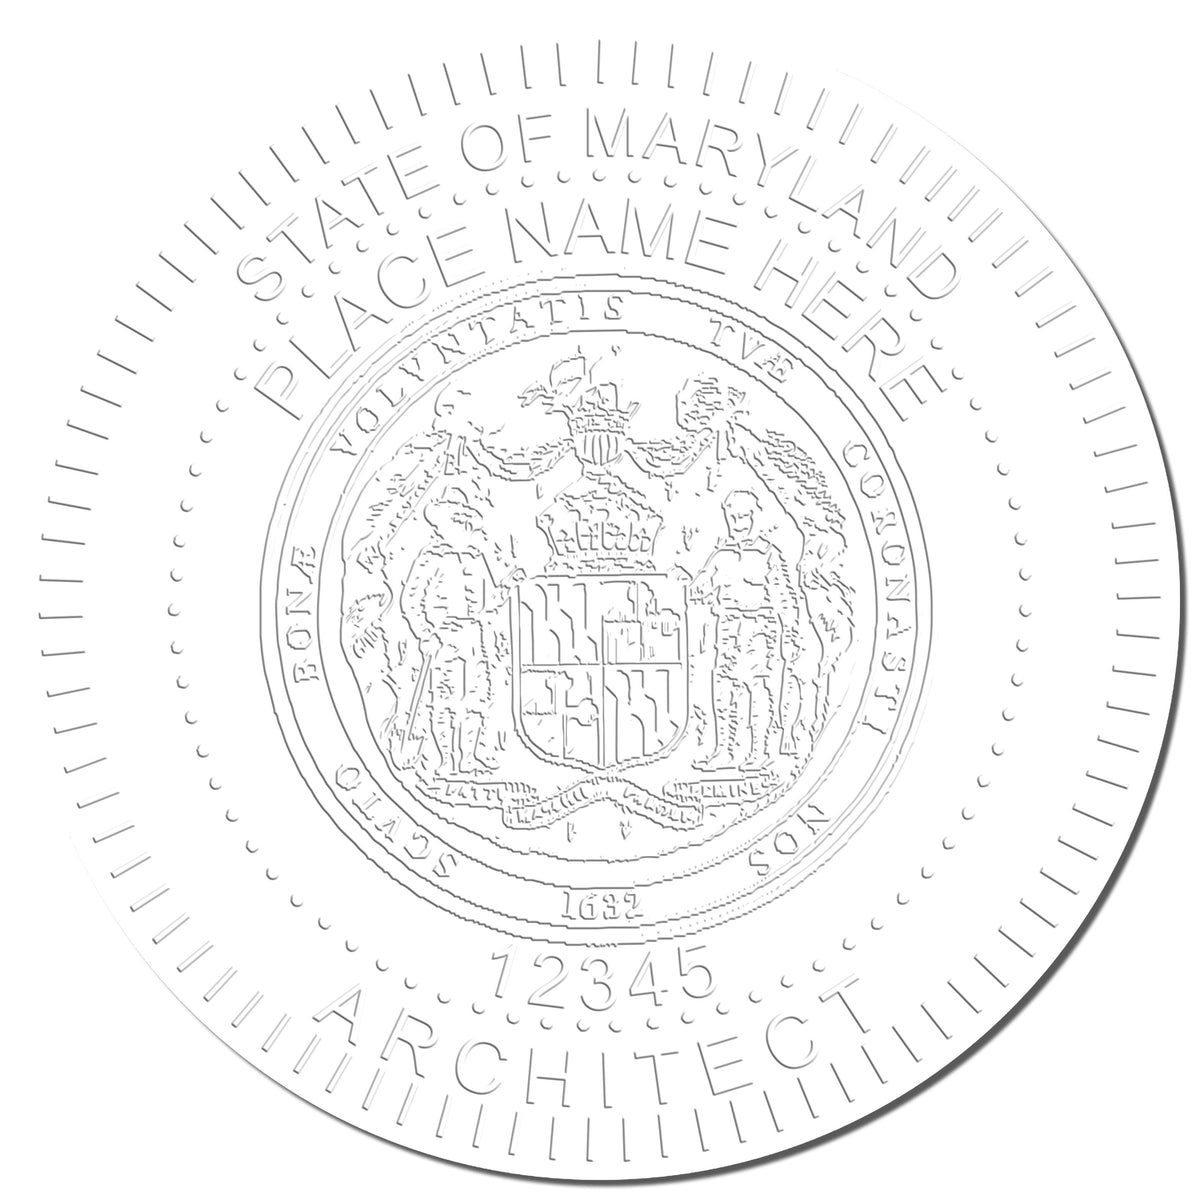 This paper is stamped with a sample imprint of the Gift Maryland Architect Seal, signifying its quality and reliability.